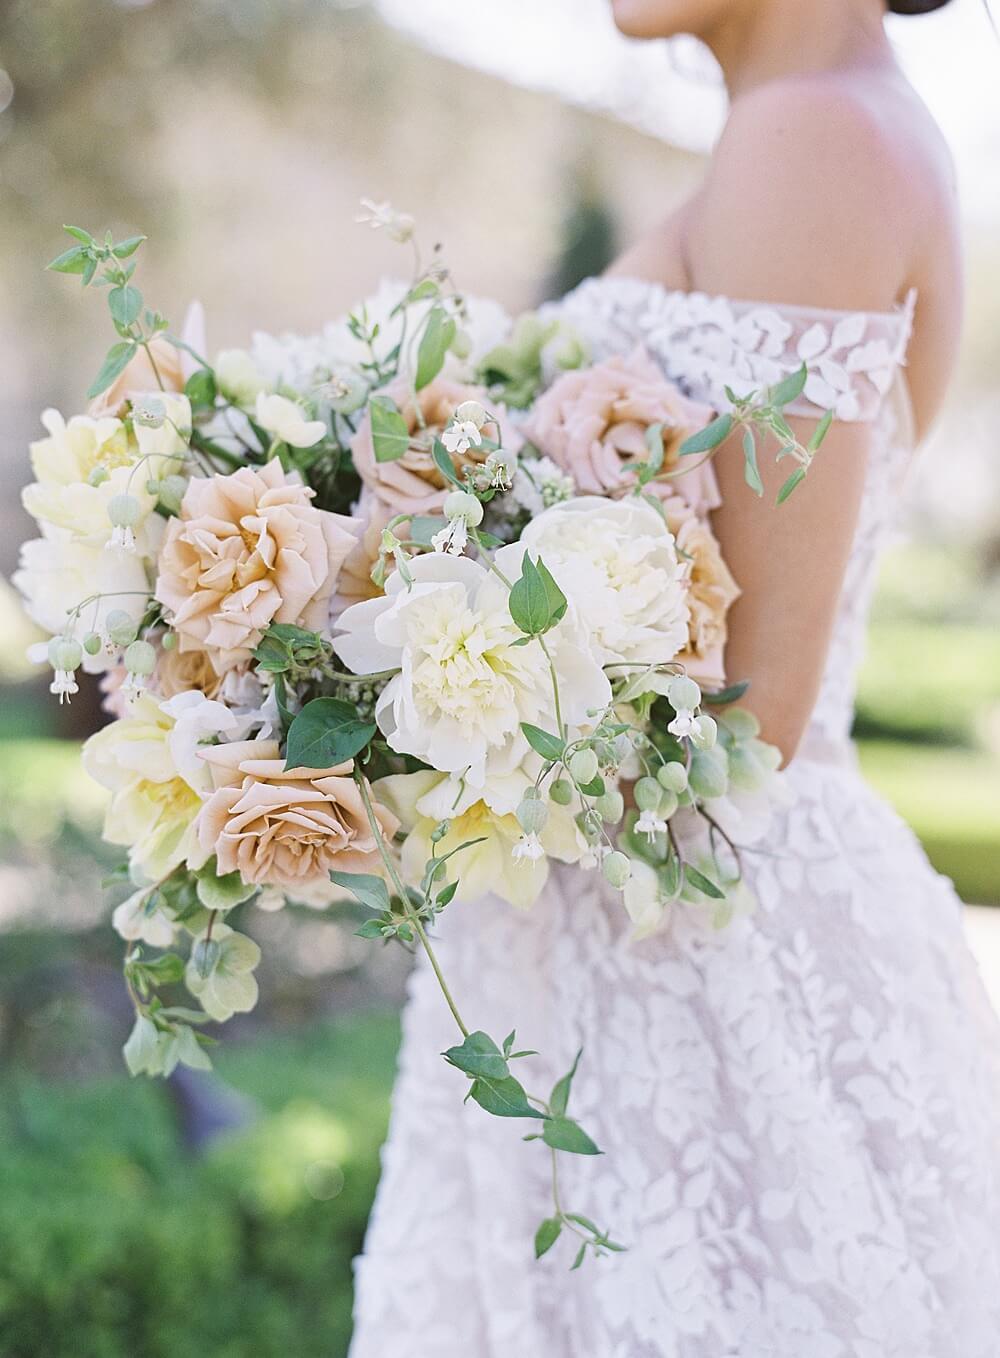 peach cream and green bridal bouquet held by bride in floral applique dress - Jacqueline Benét Photography